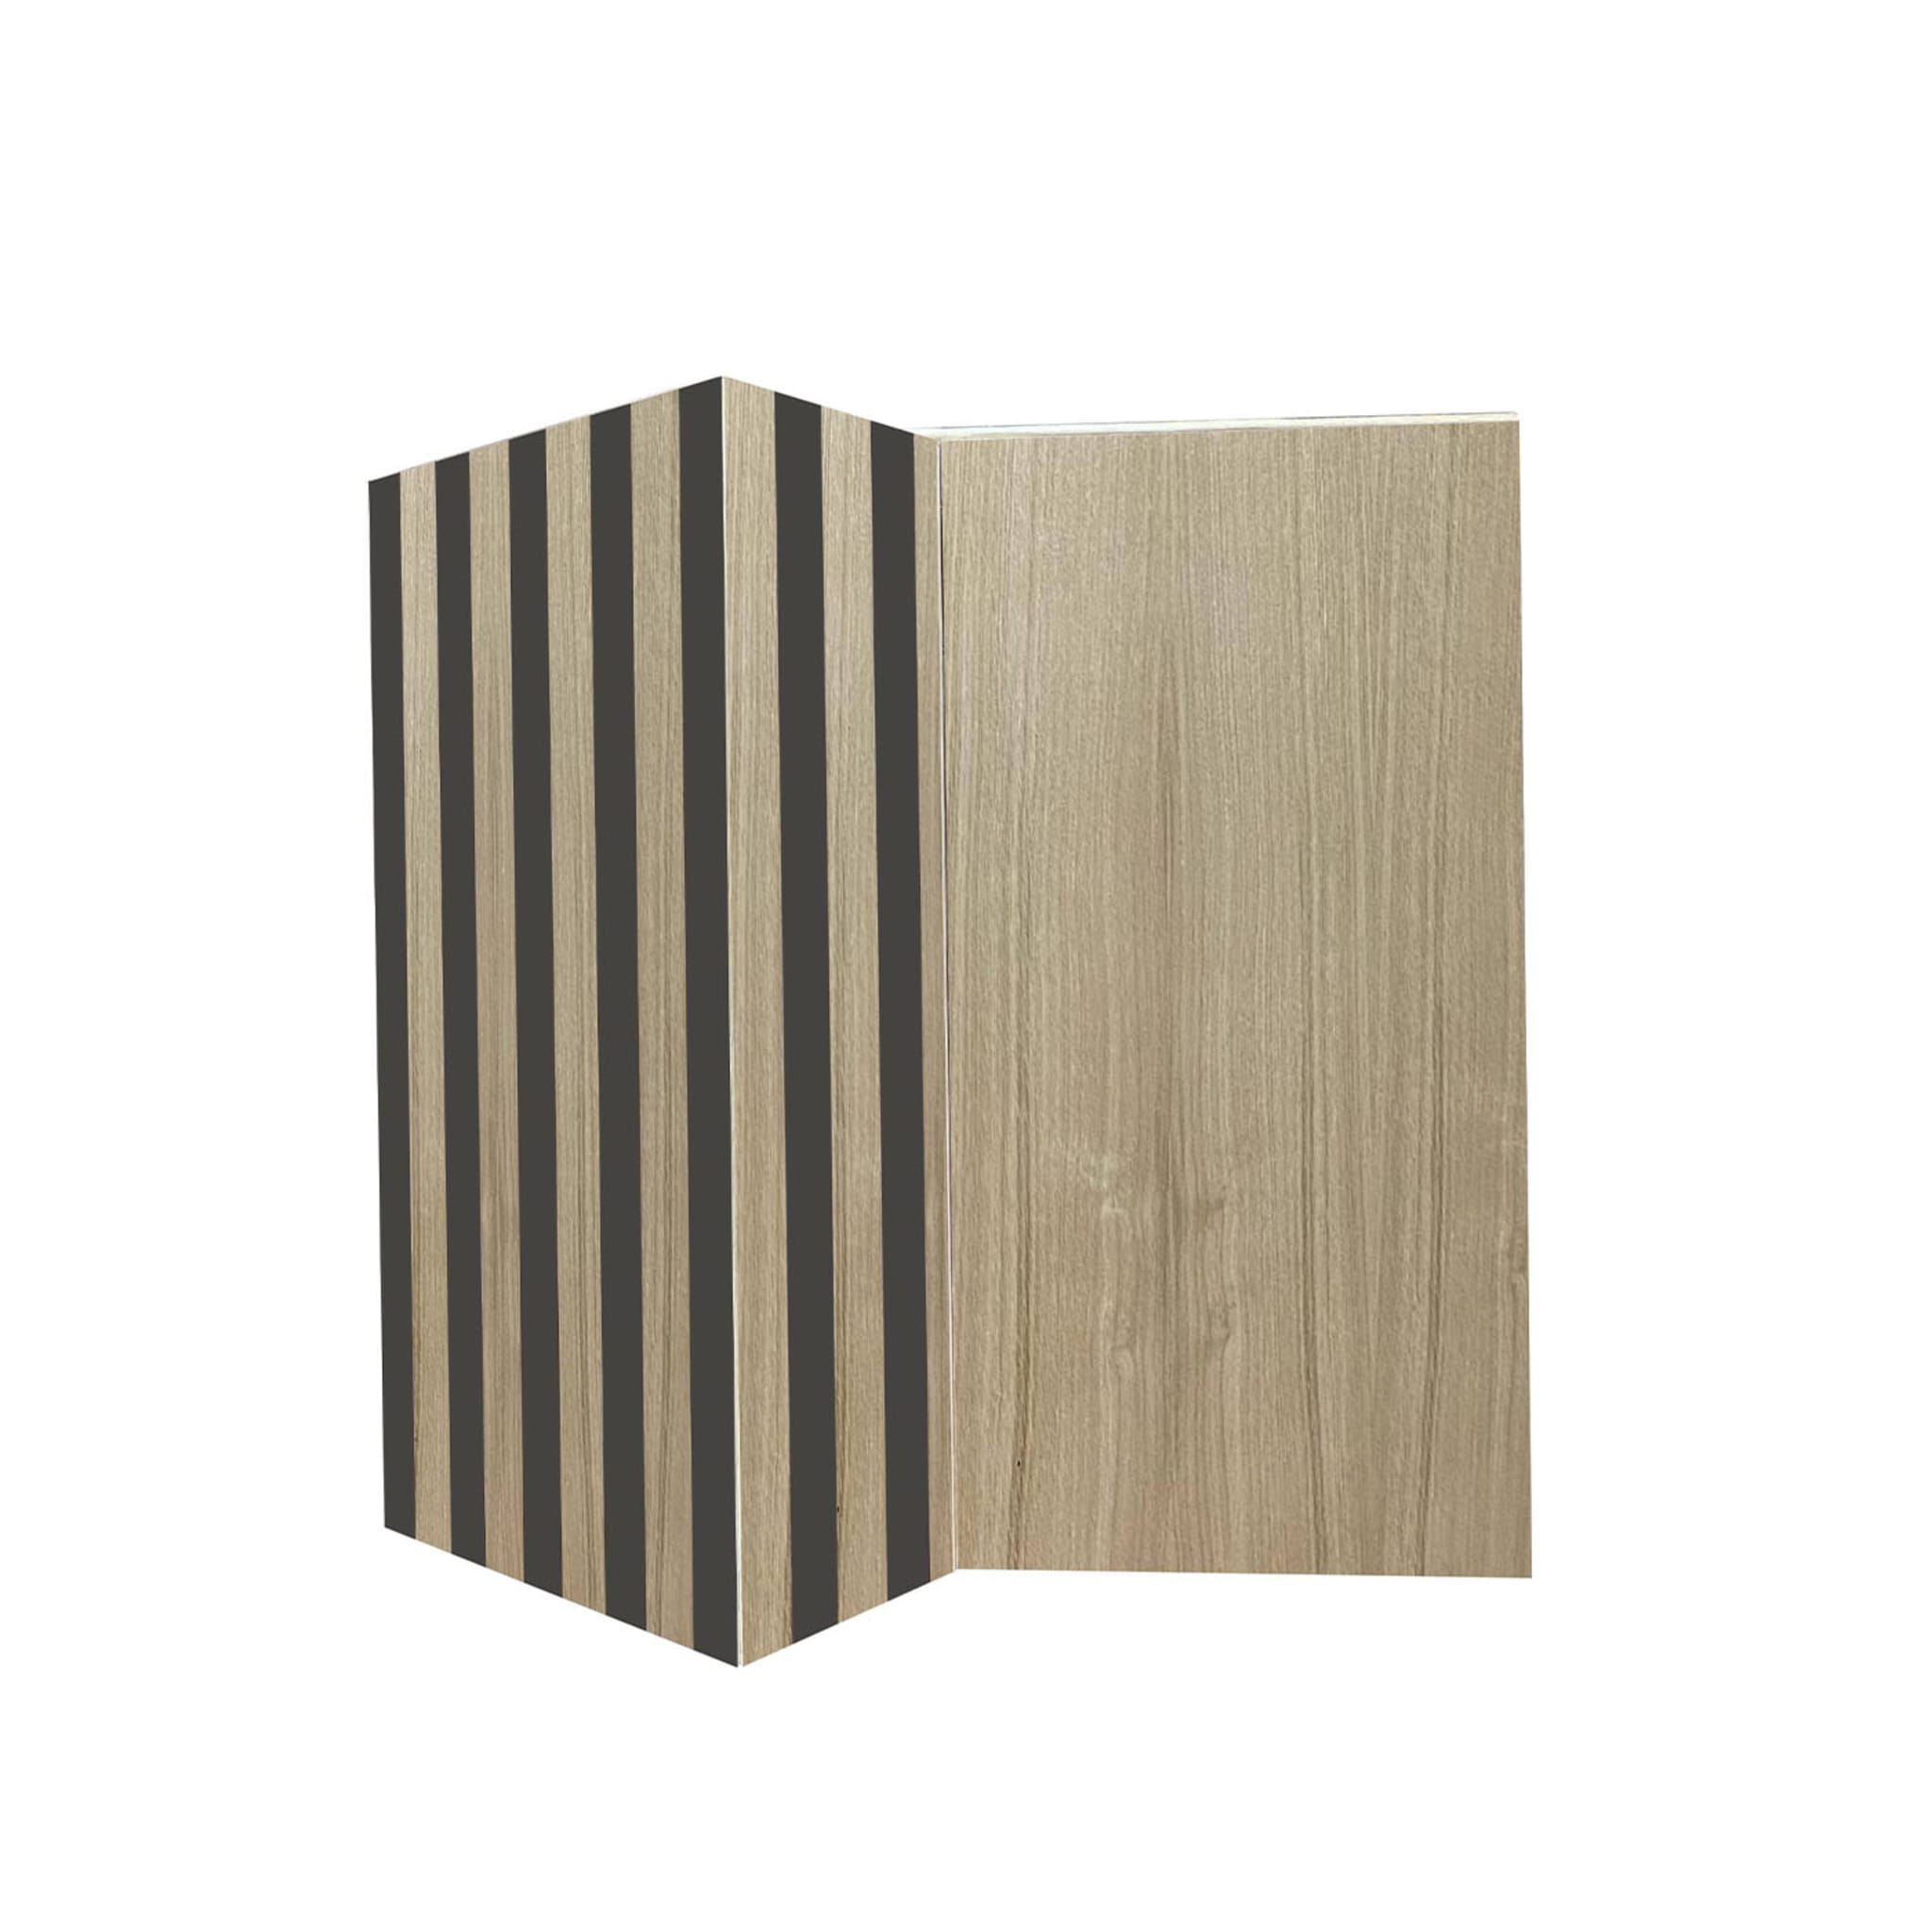 Md1 4-Door Striped Sideboard by Meccani Studio - Alternative view 5